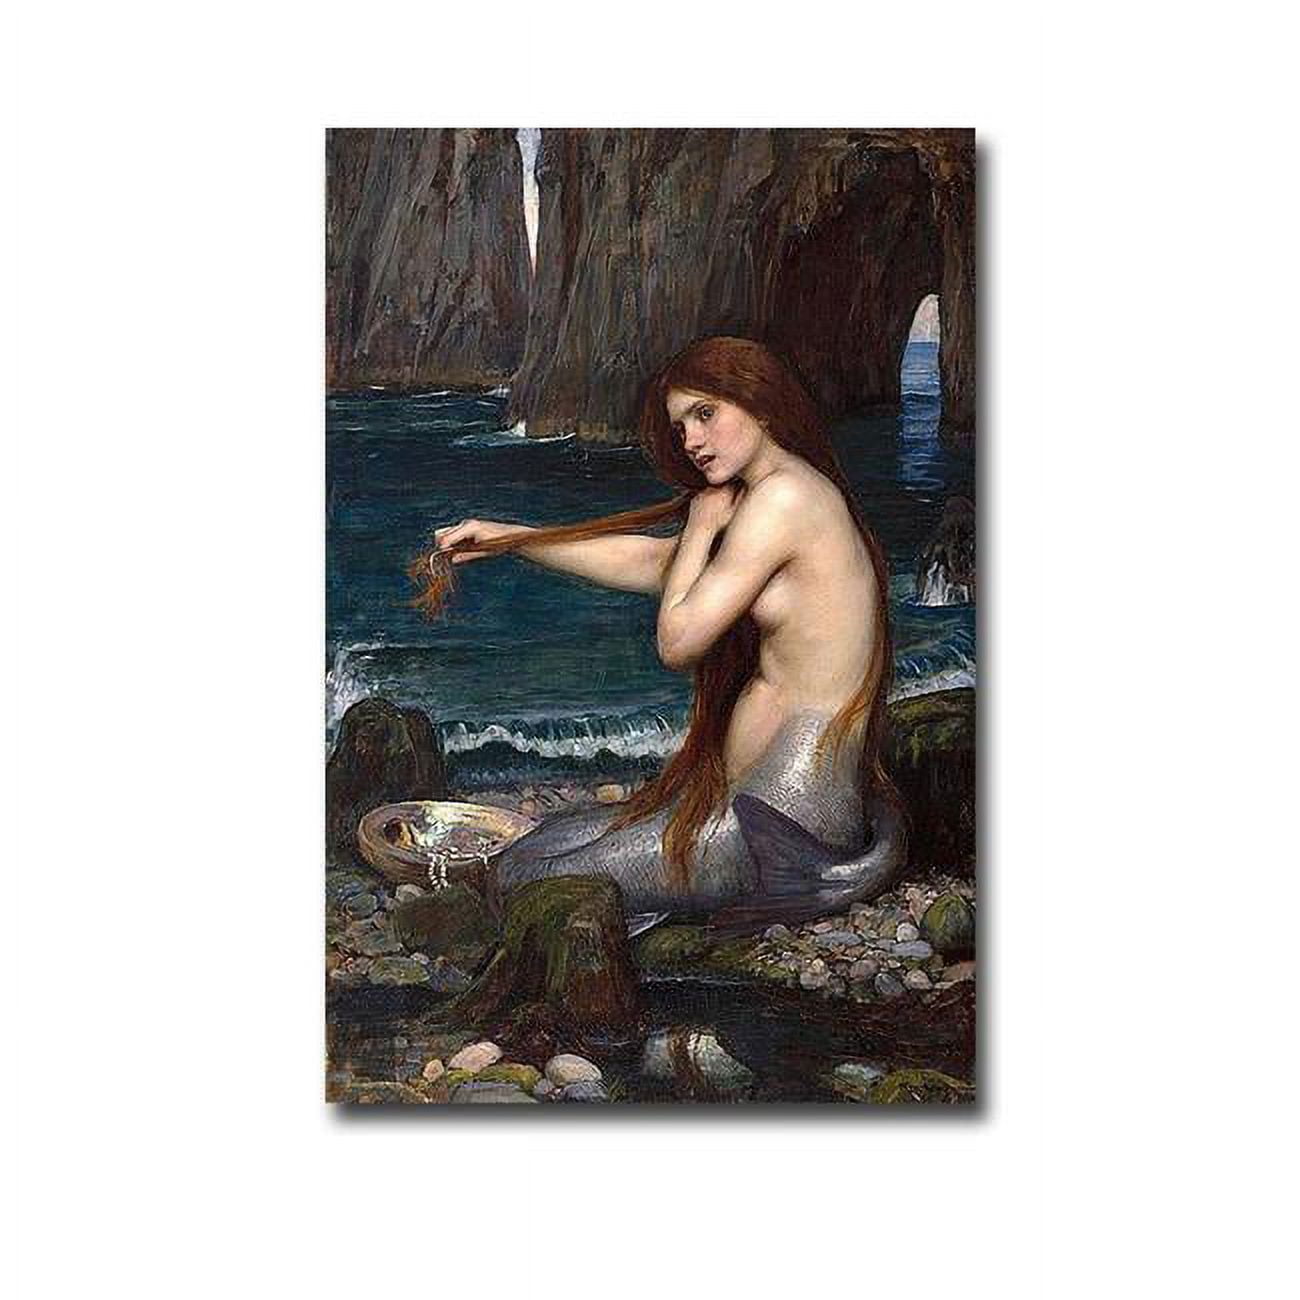 1218x835ig The Mermaid By John Waterhouse Premium Gallery-wrapped Canvas Giclee Art - Ready-to-hang, 12 X 18 X 1.5 In.